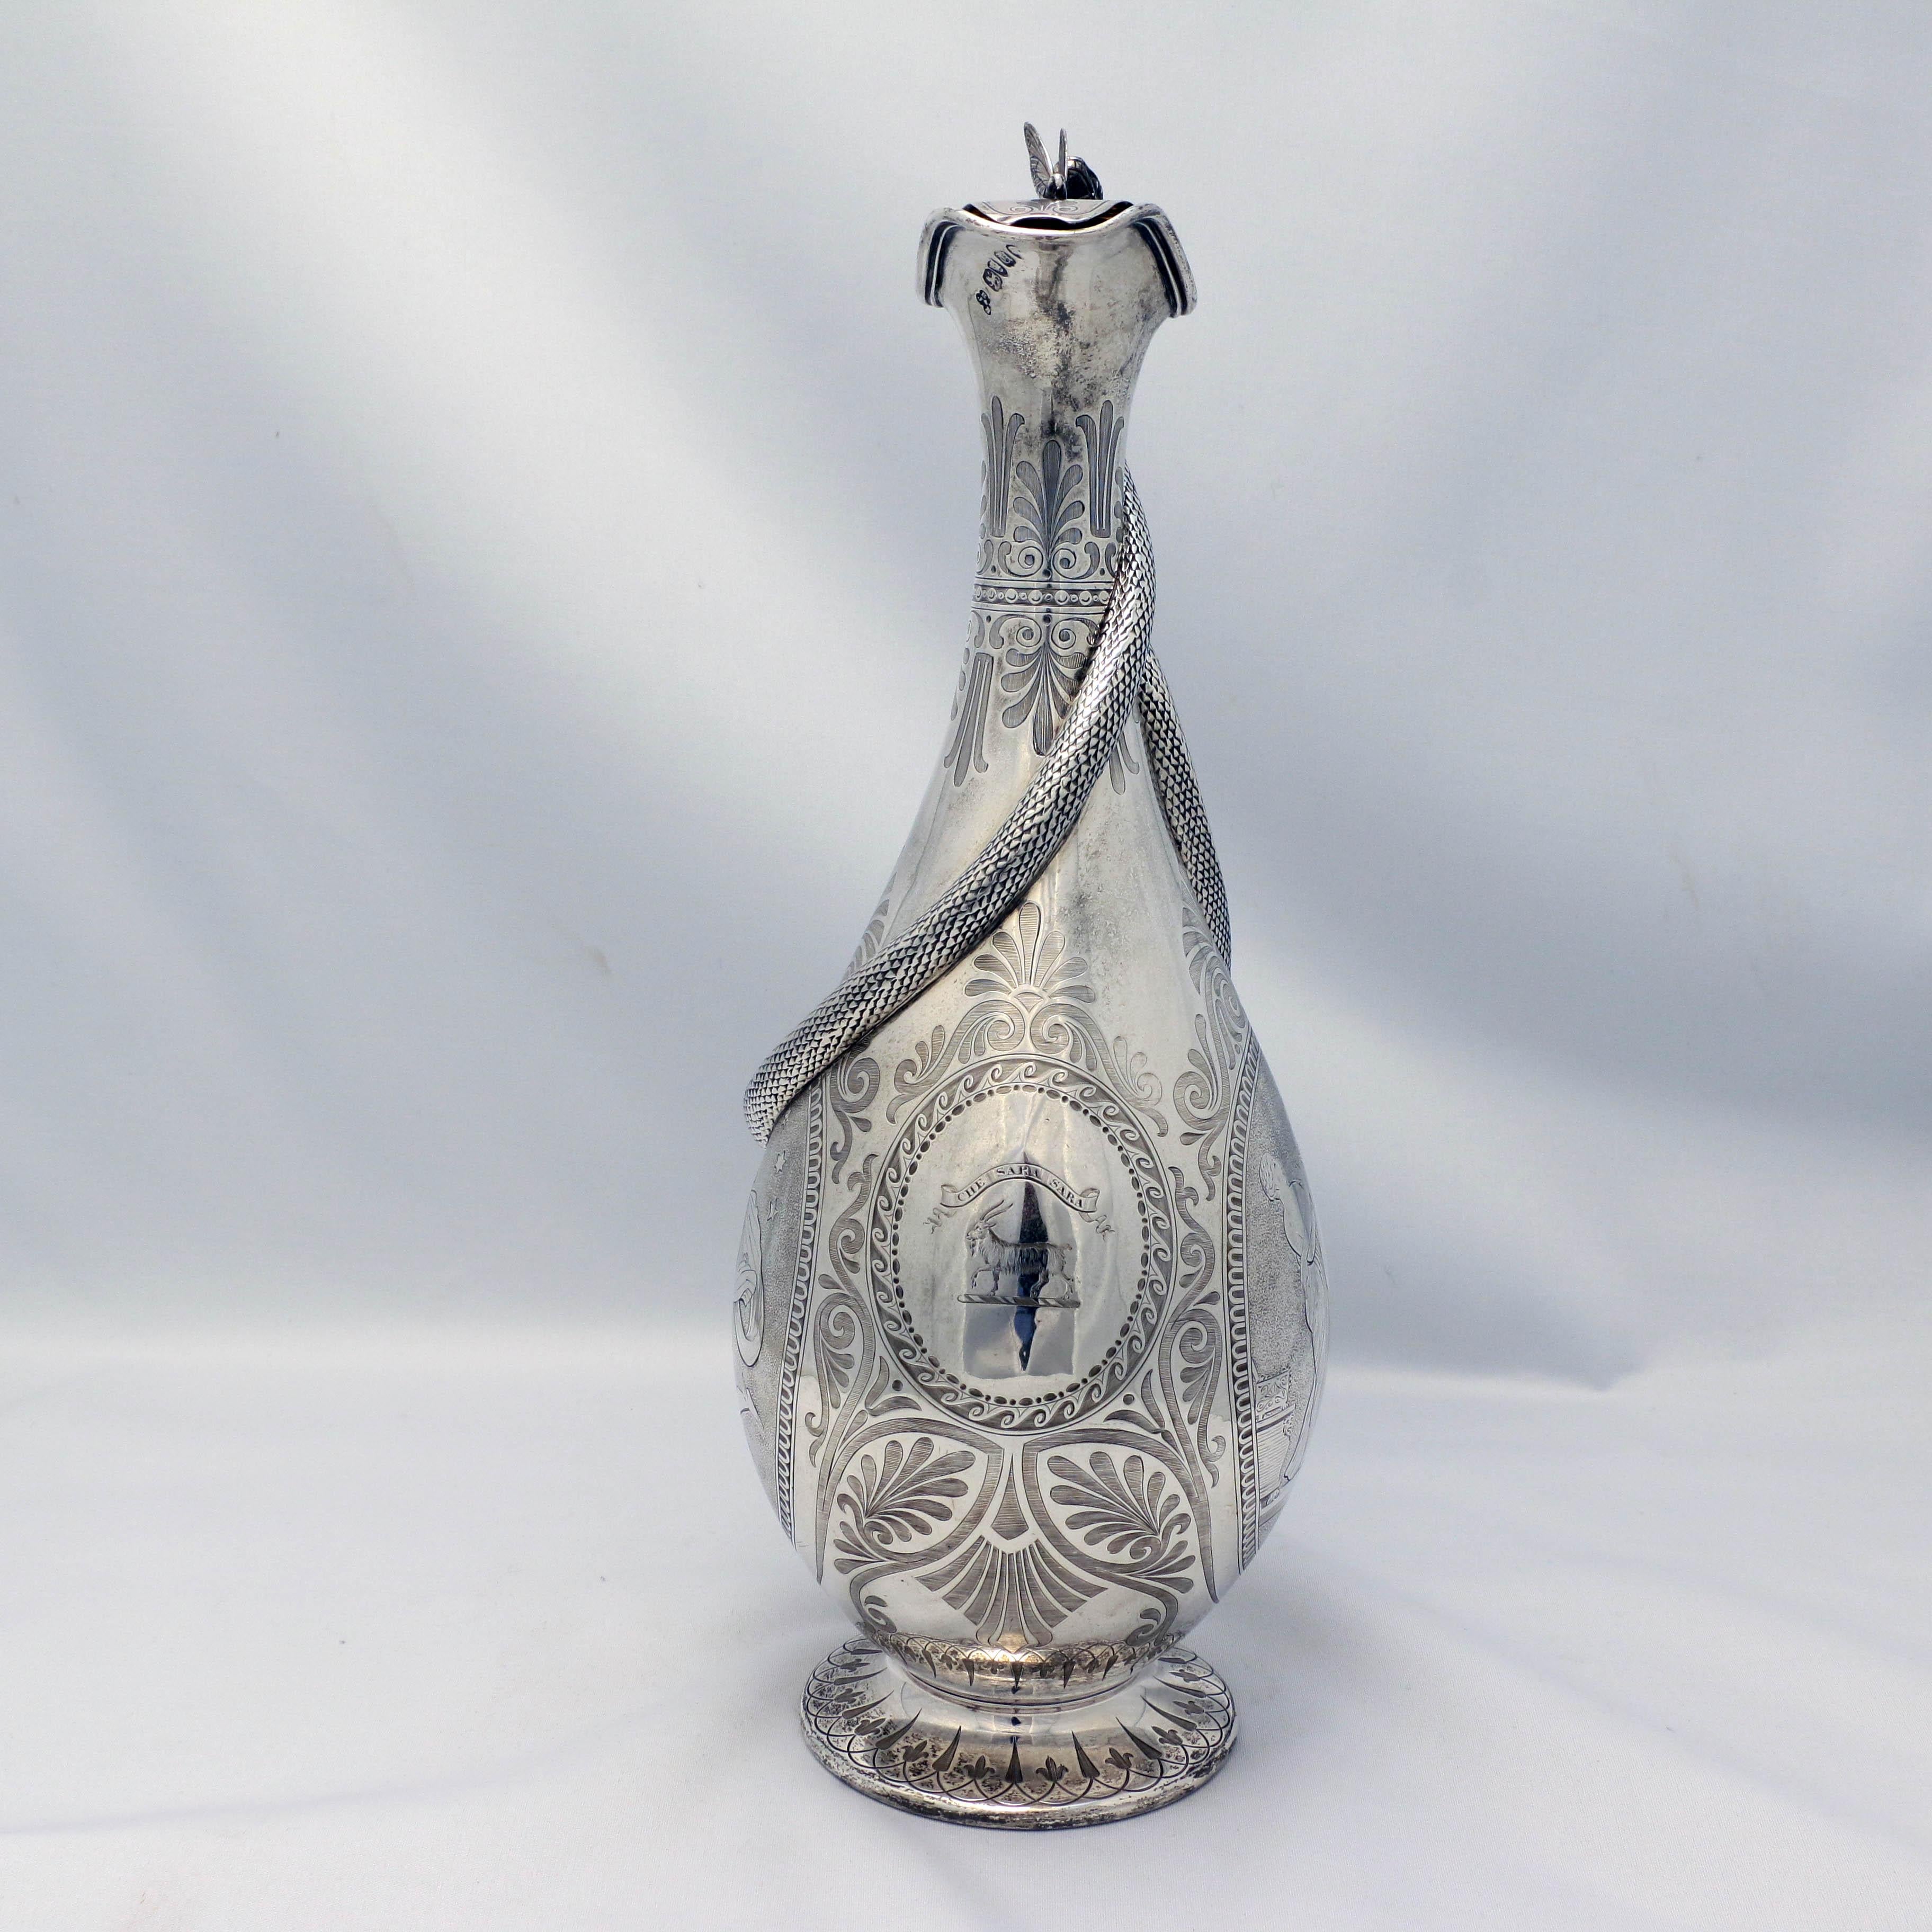 Made in 1854 by the Barnard Brothers, based on a classical style, this jug is about as interesting as such a piece could possibly be. The pear-shaped ovoid body is centered by a circular panel crested with a goat and the motto 